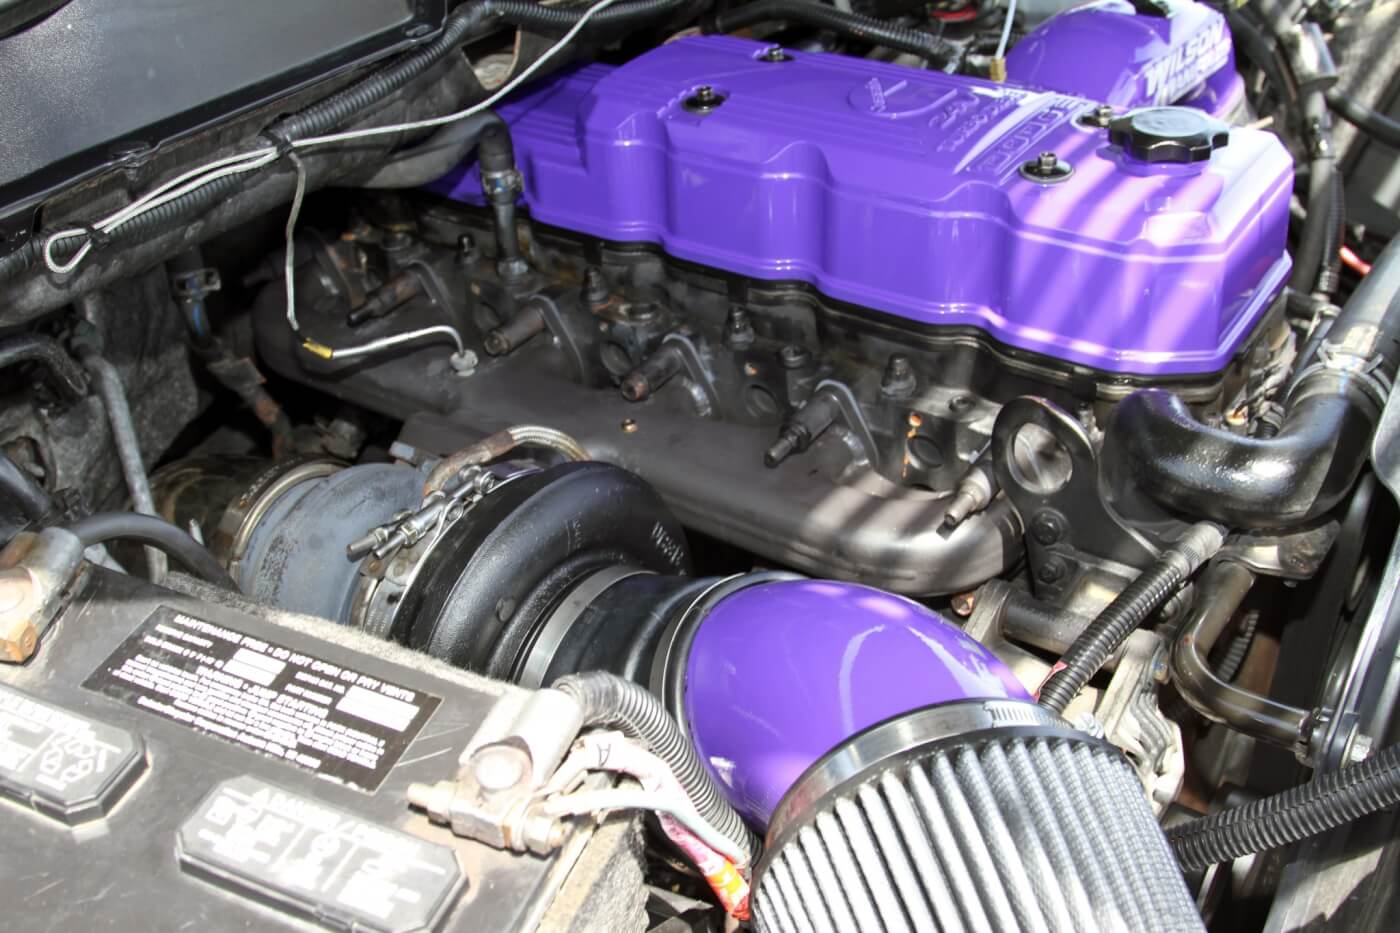 The passenger side of the 5.9L Cummins is dominated by a Steed Speed manifold and a Fleece Performance Engineering S468 turbocharger.